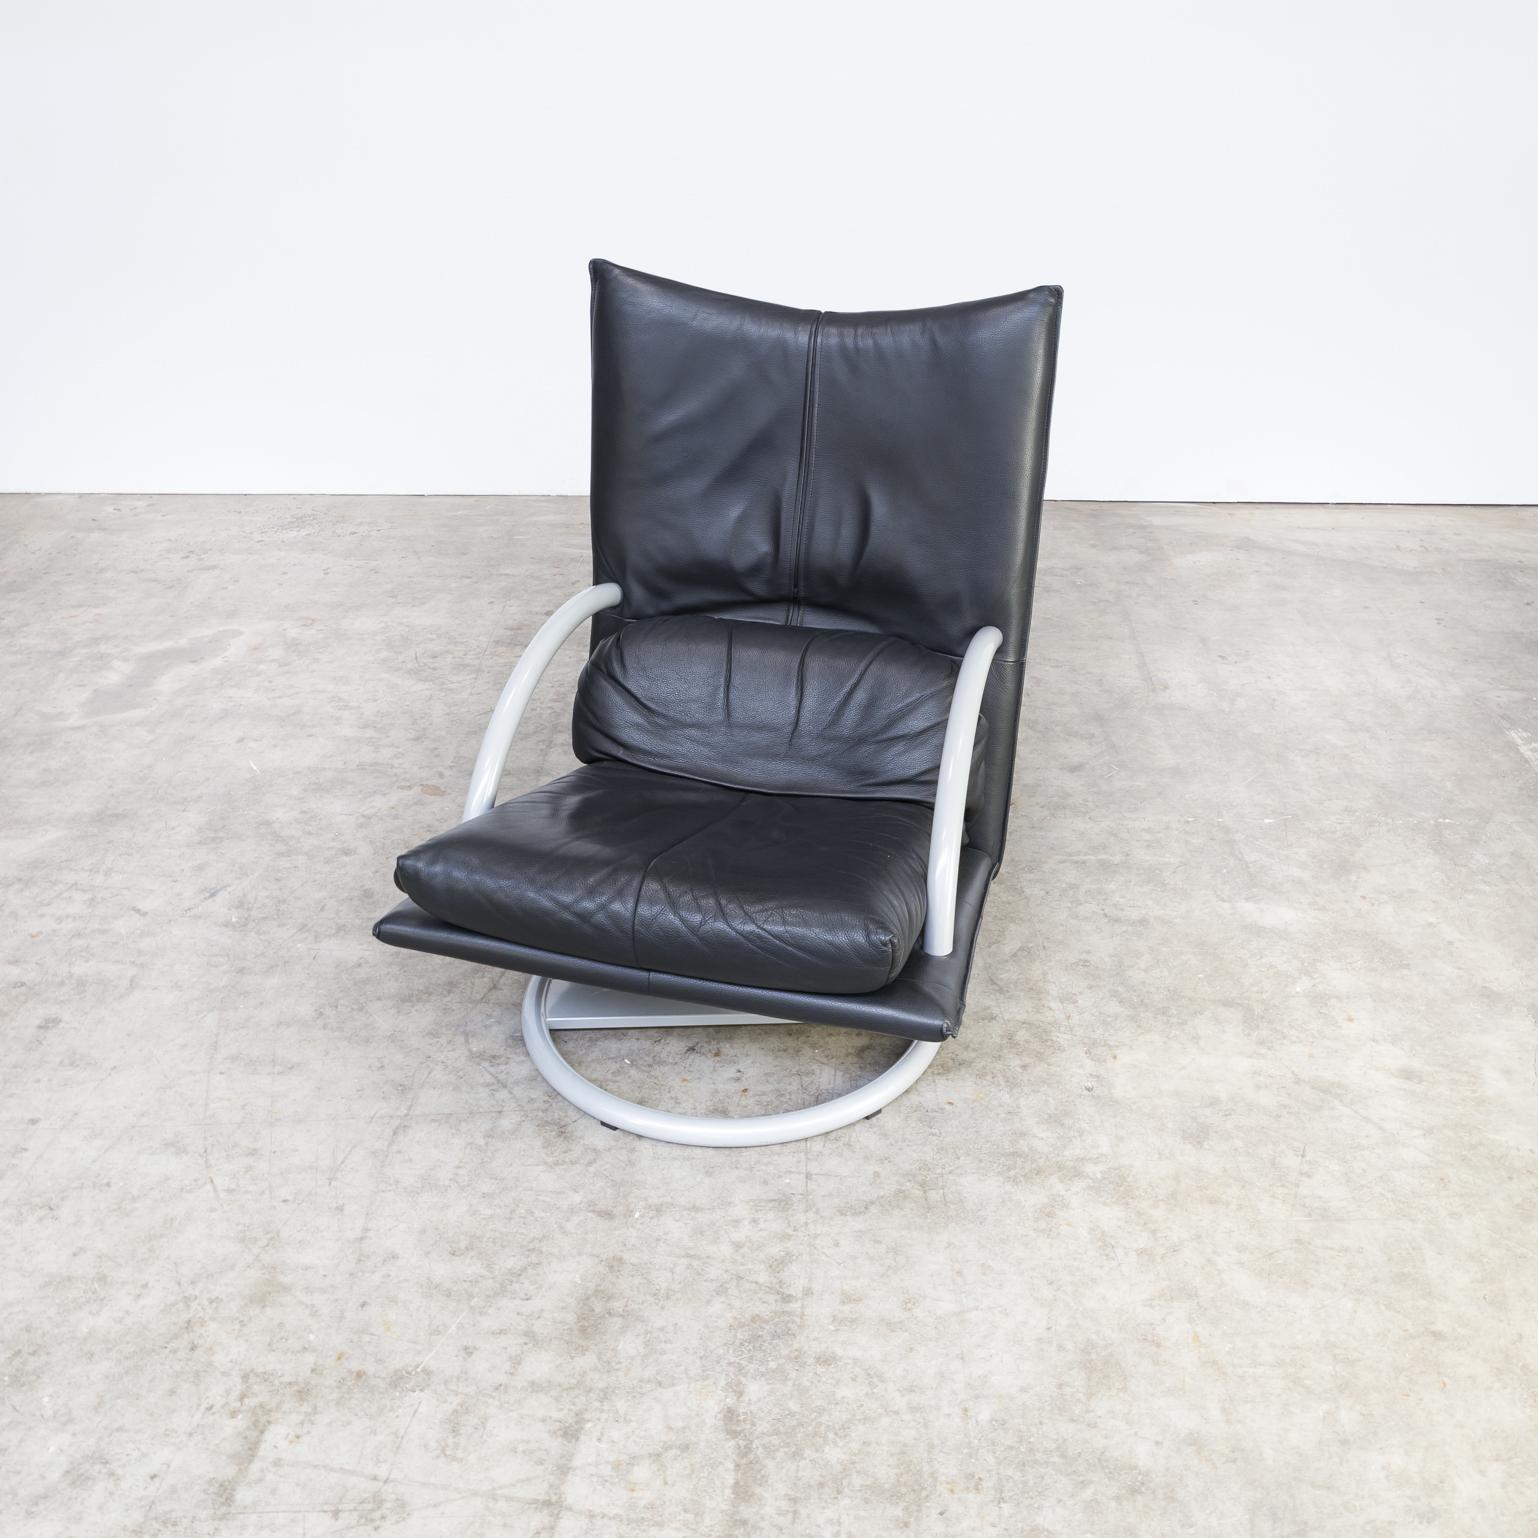 Late 20th Century 1990s Rolf Benz Relax Lounge Fauteuil Build on a Italian Morex Metal Frame For Sale